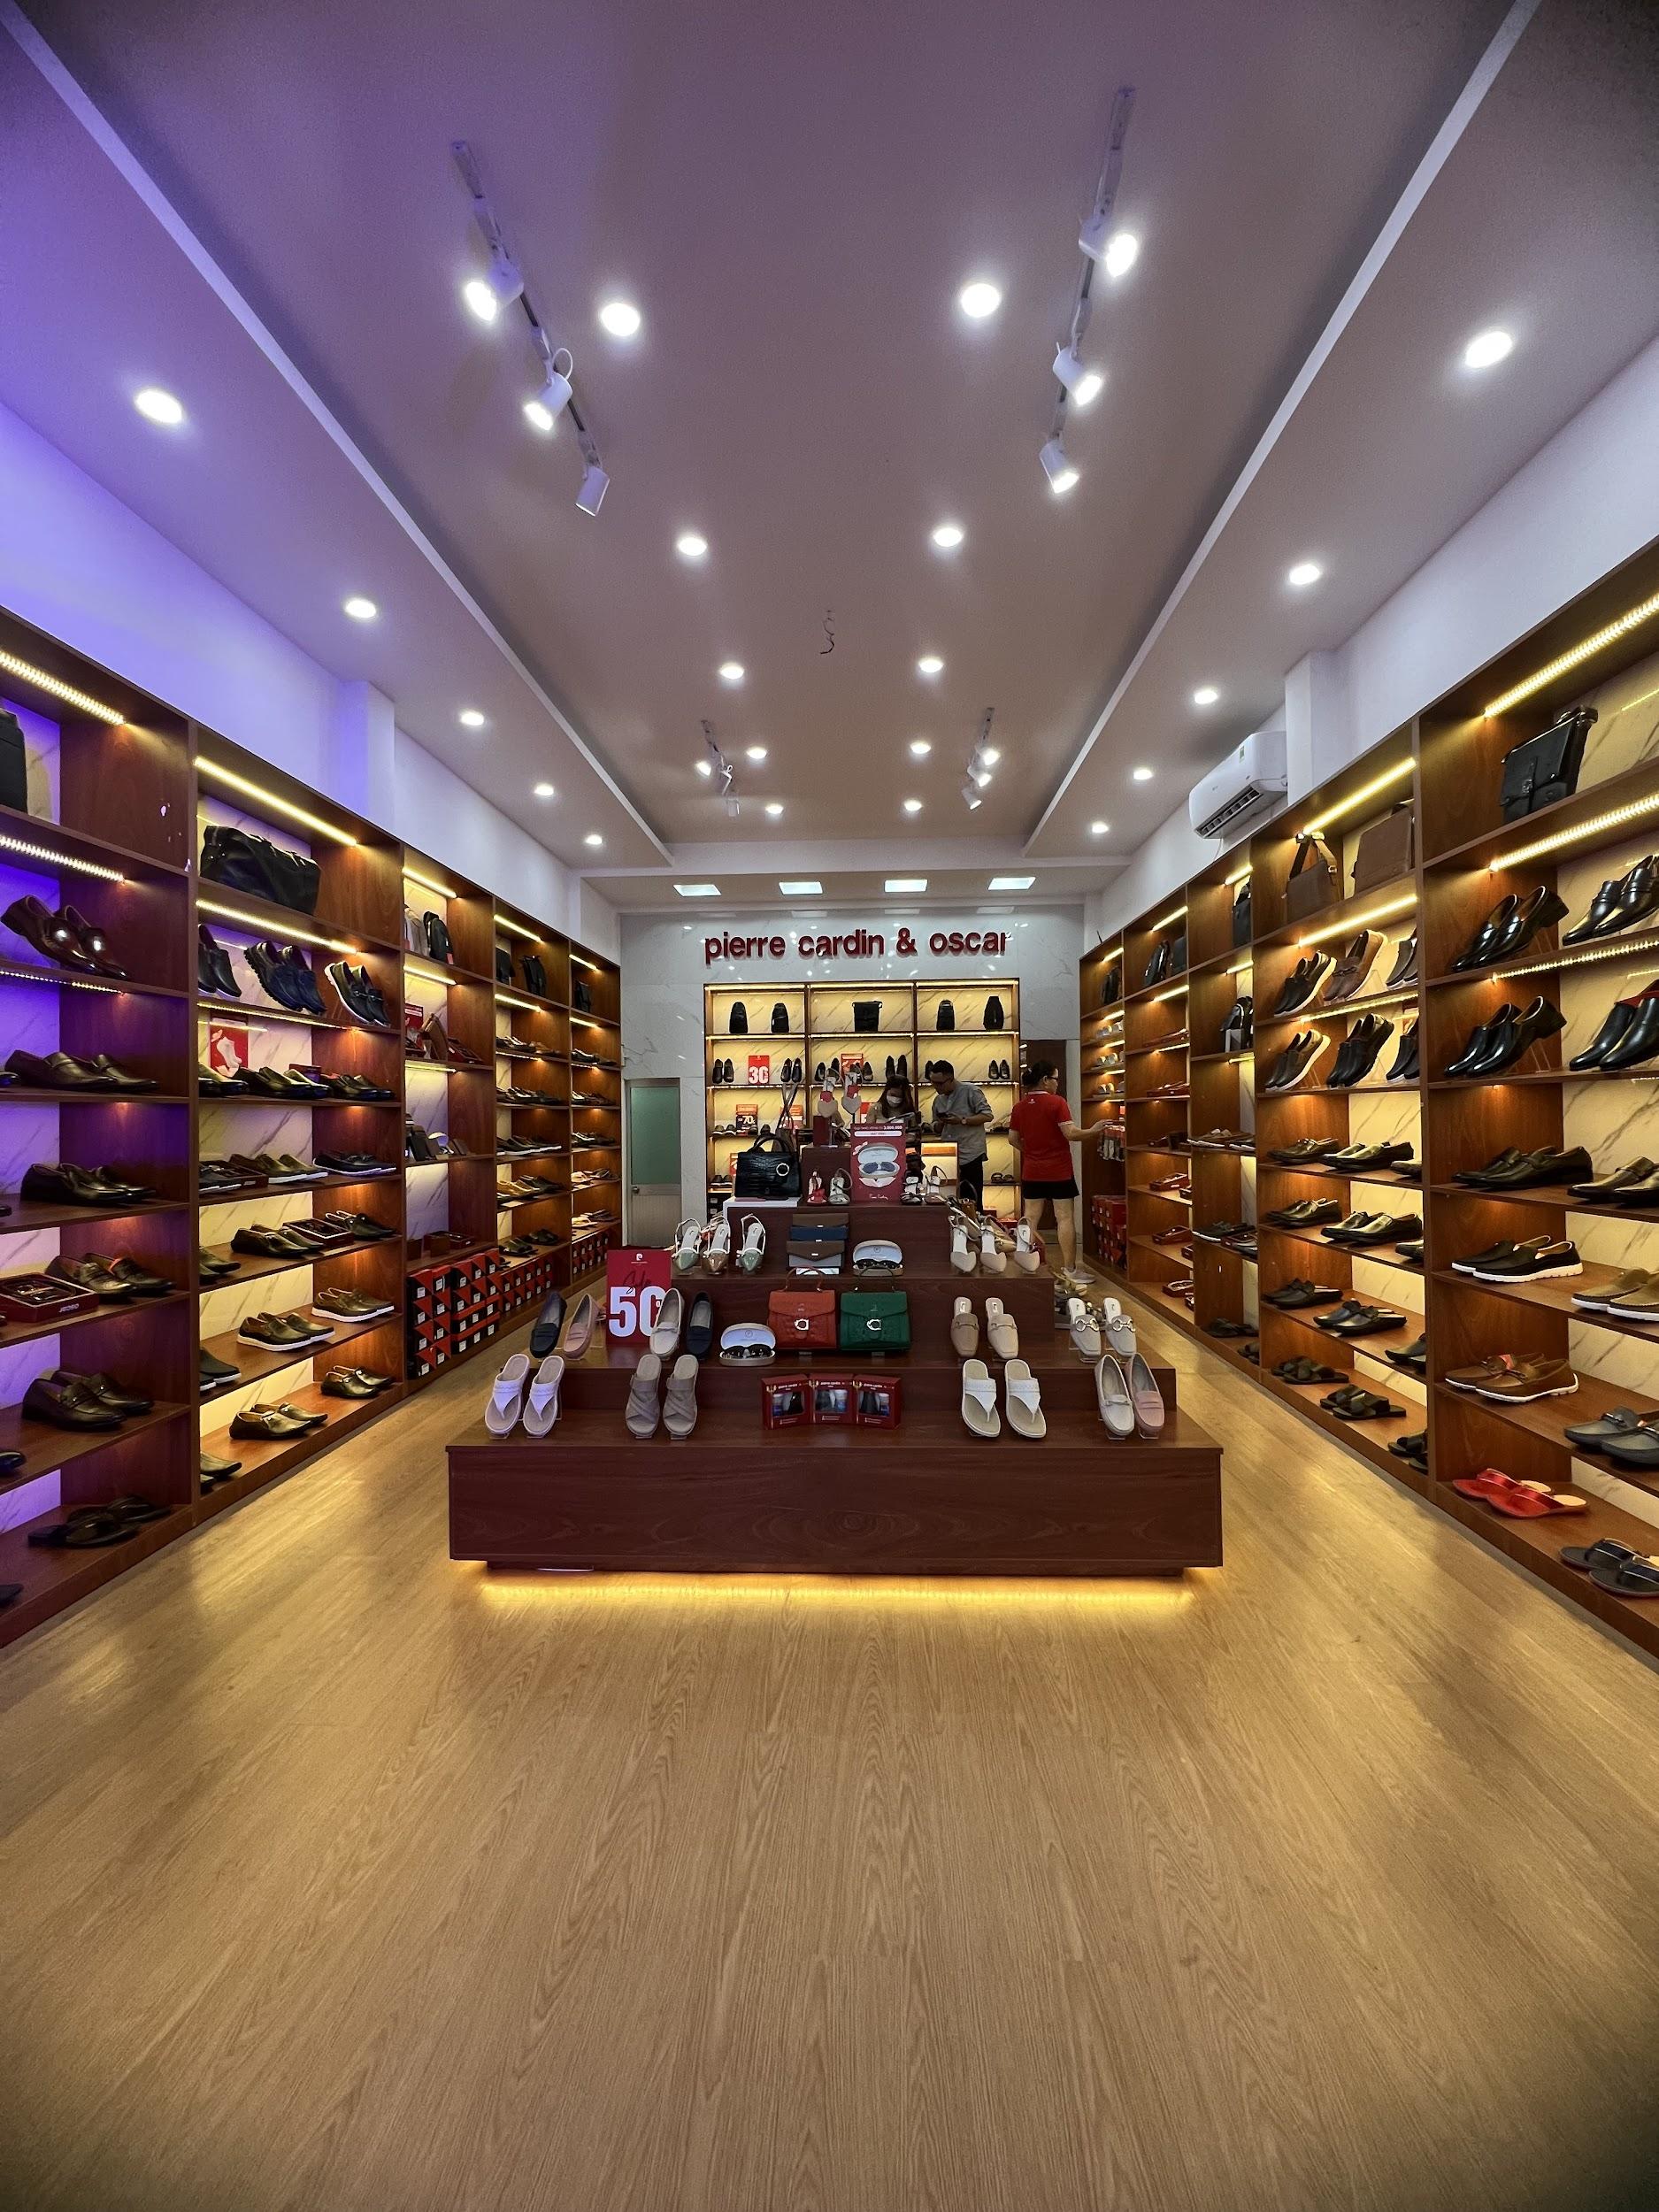 Pierre Cardin Shoes & Oscar Fashion continues to open 10 stores ahead of the big April celebration - Photo 3.